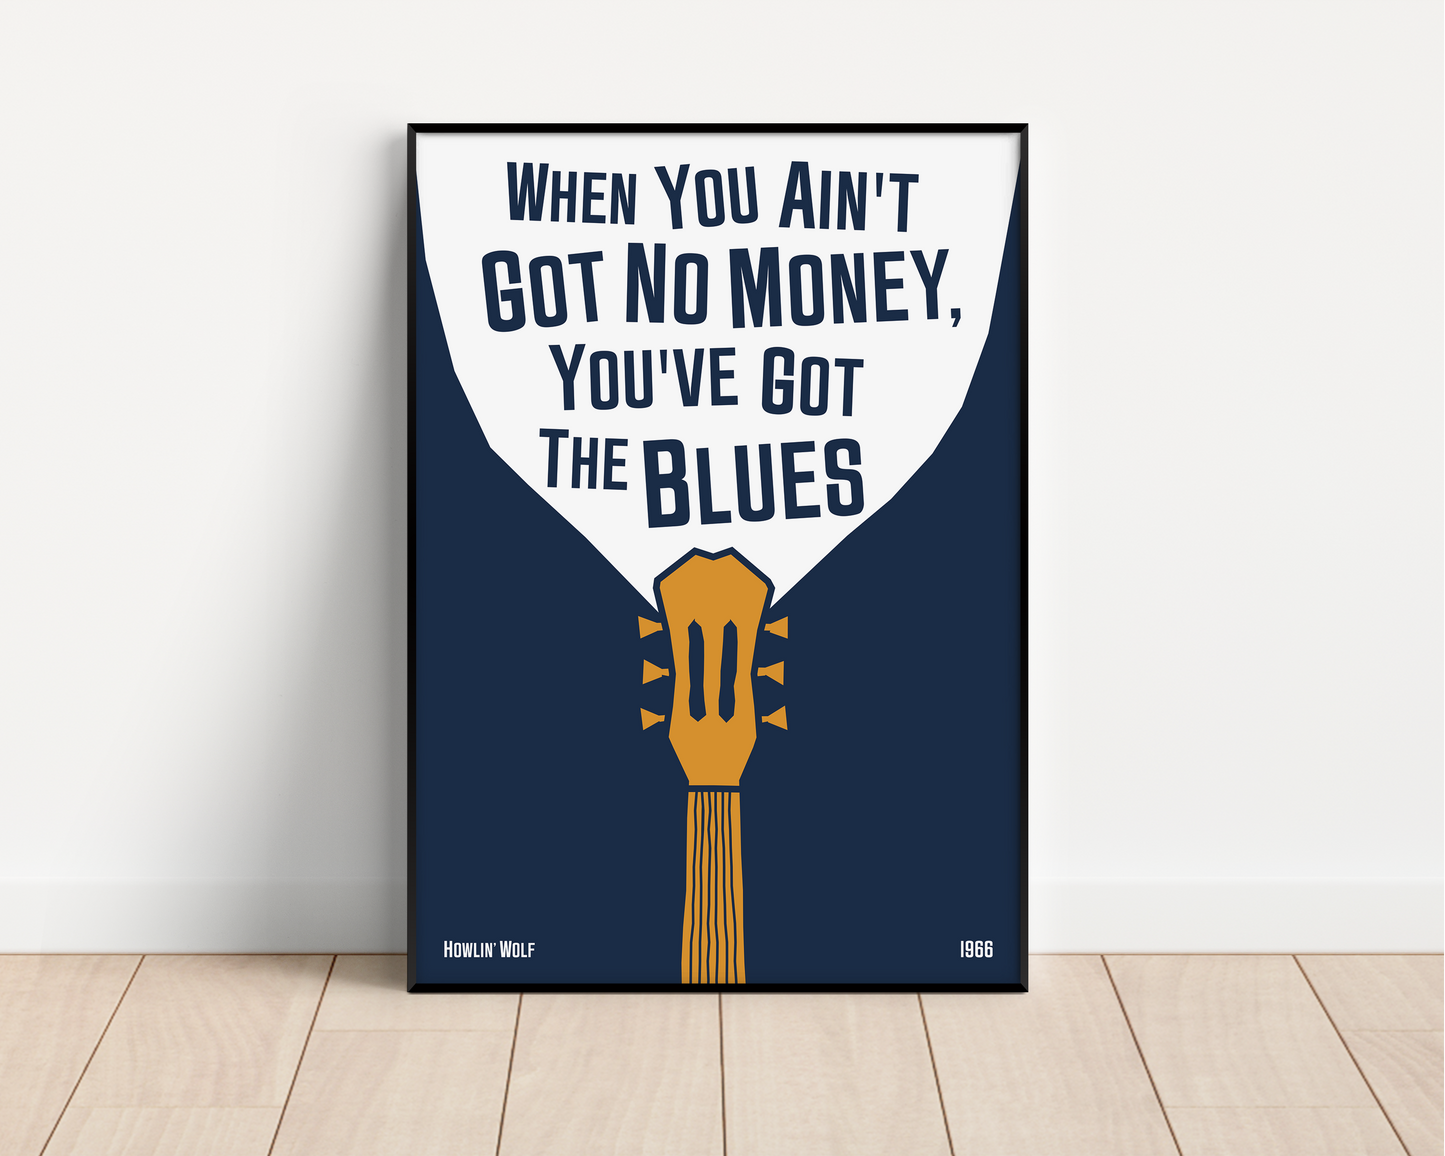 Cool blues music poster with guitar design, featuring a Howlin' Wolf quote. Retro black frame print, leaning against a white wall, perfect home decor.